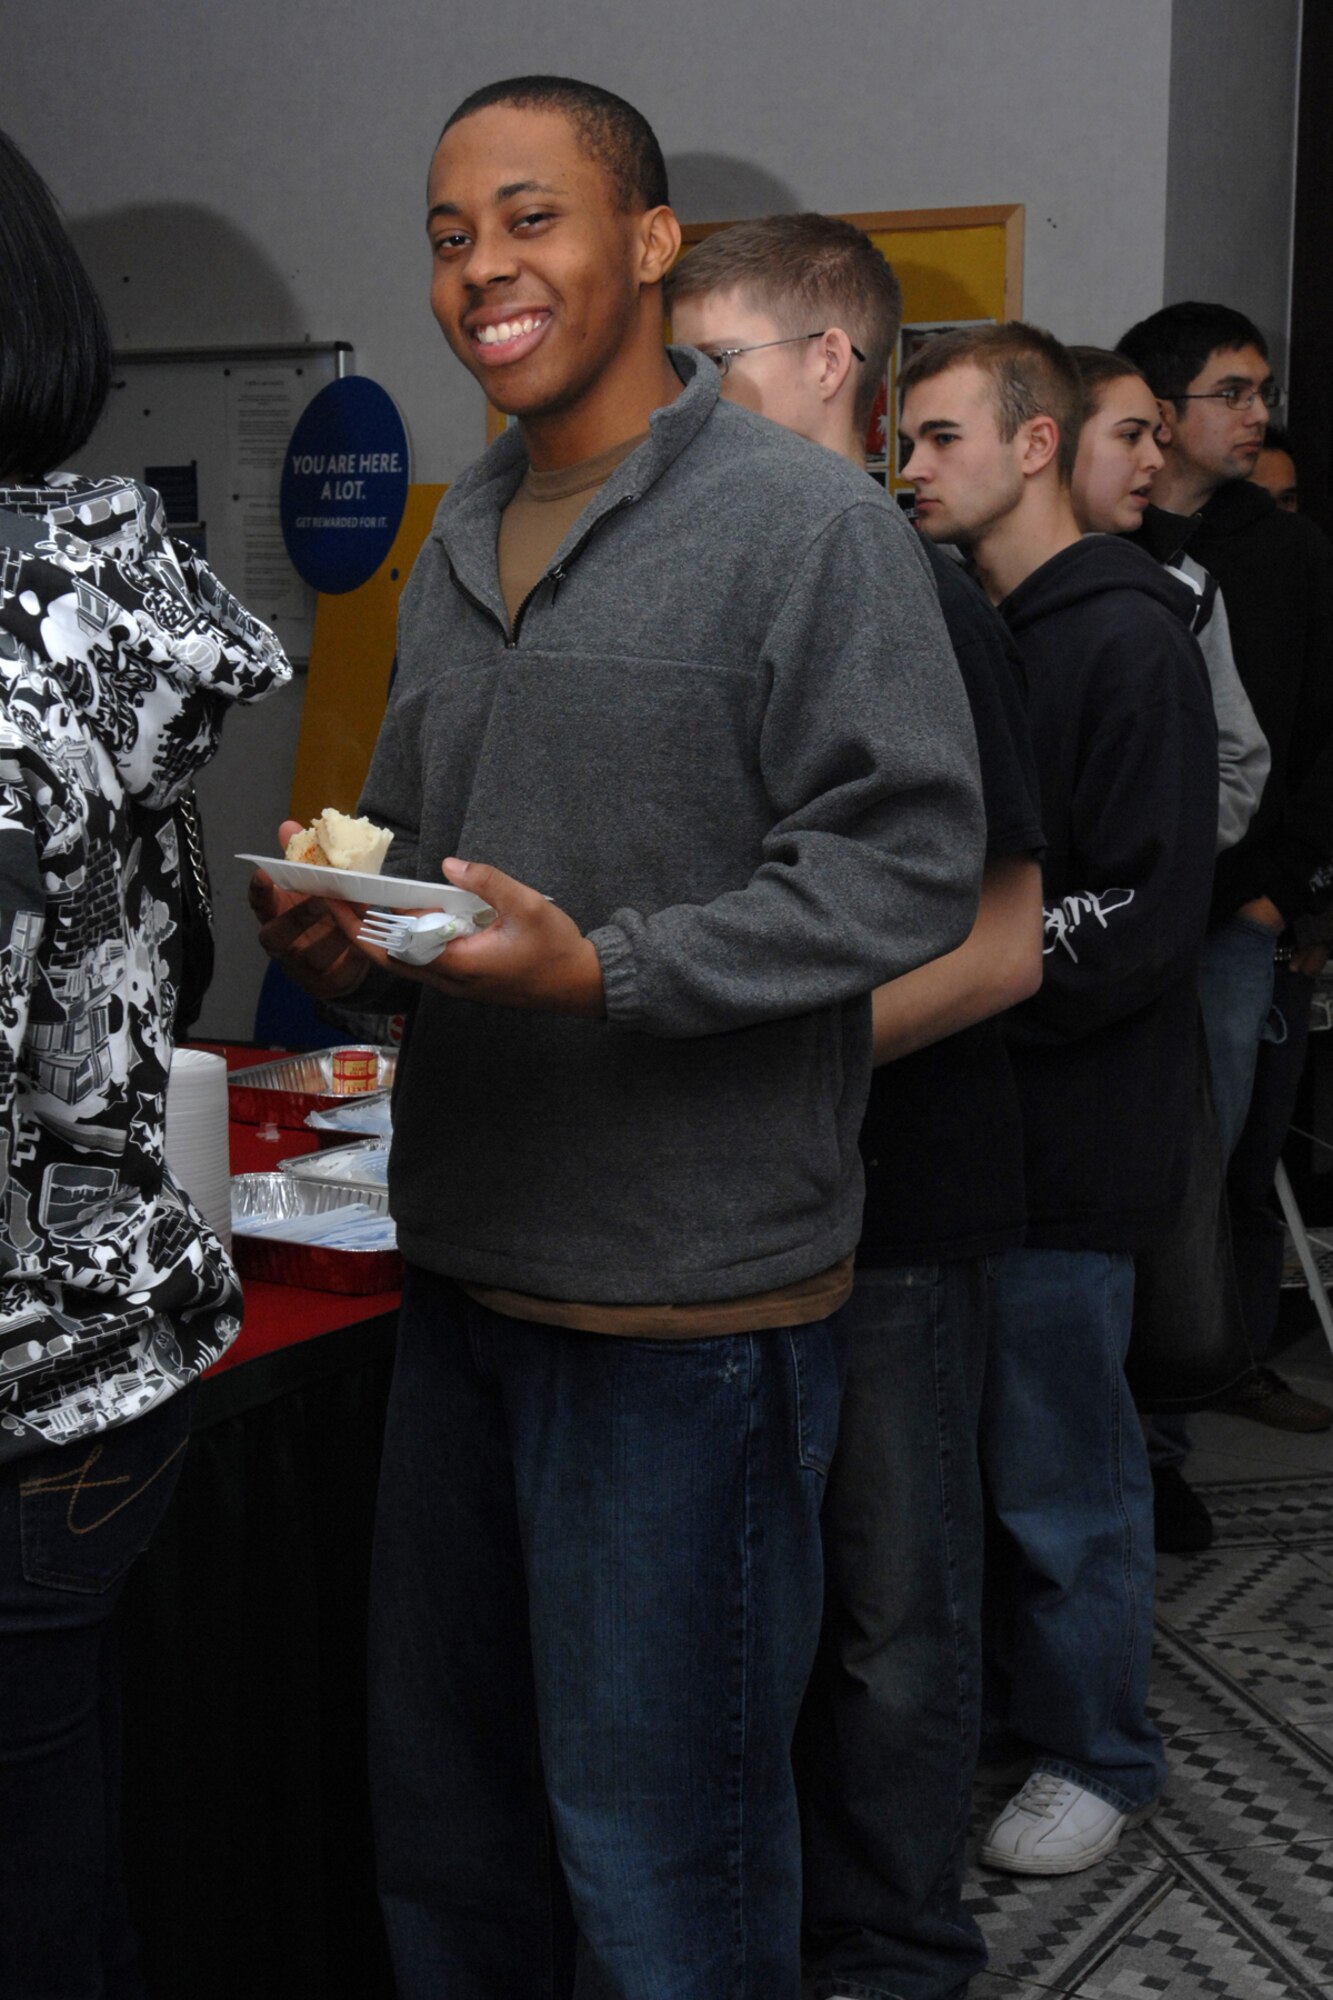 SPANGDAHLEM AIR BASE, Germany – Airman Adrian Paisley, 52nd Services Squadron, goes through the food line at the Unaccompanied Airman’s Holiday Party in the Brick House Dec. 22, 2007. The party sponsored by the 52nd Fighter Wing First Sergeant’s Council included a full holiday meal, door prizes and games. (U.S. Air Force photo/Airman 1st Class Jenifer Calhoun)